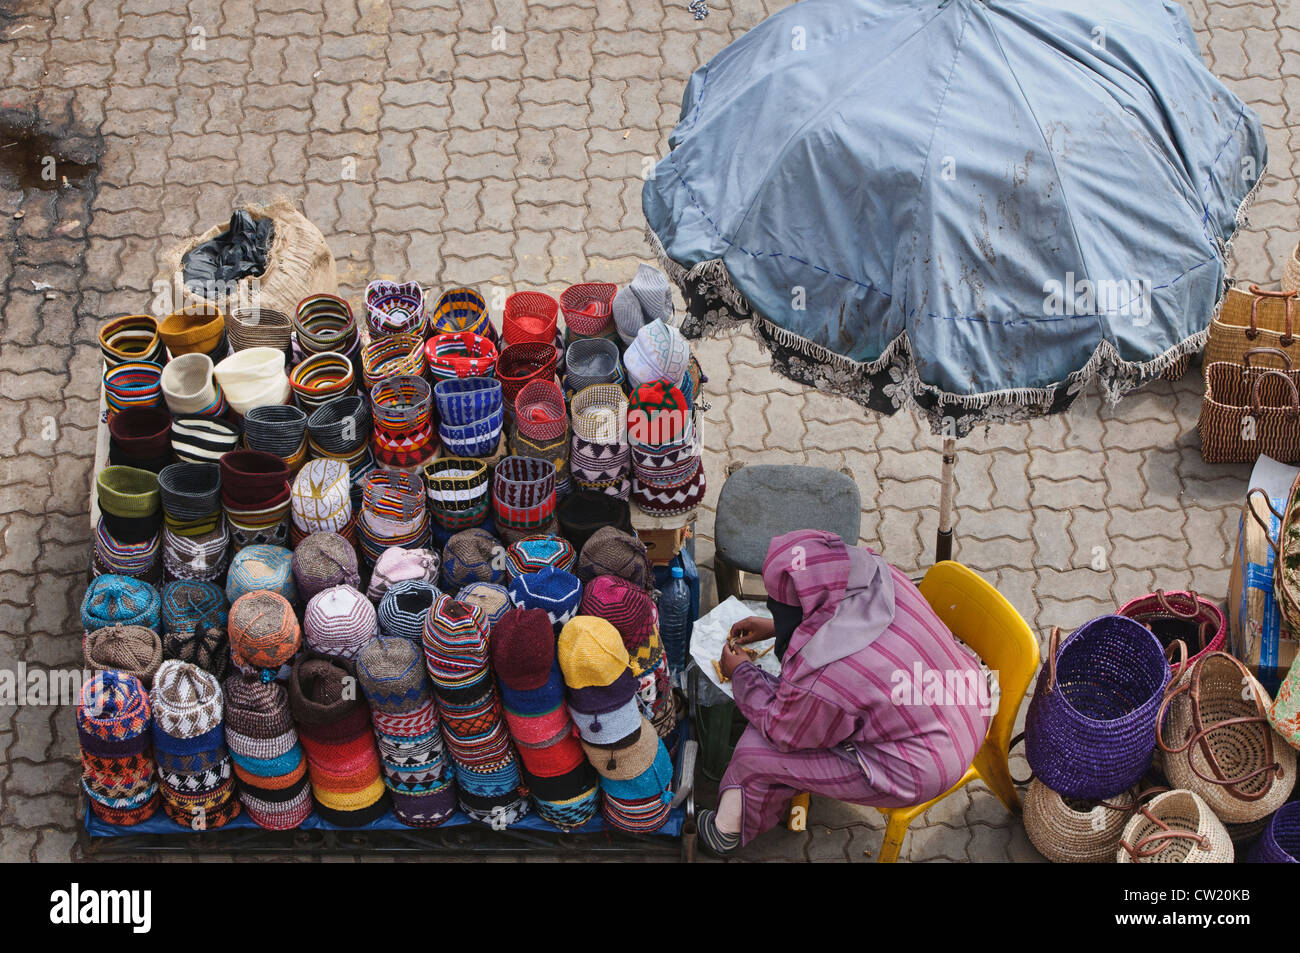 hats for sale in the ancient medina in Marrakech, Morocco Stock Photo